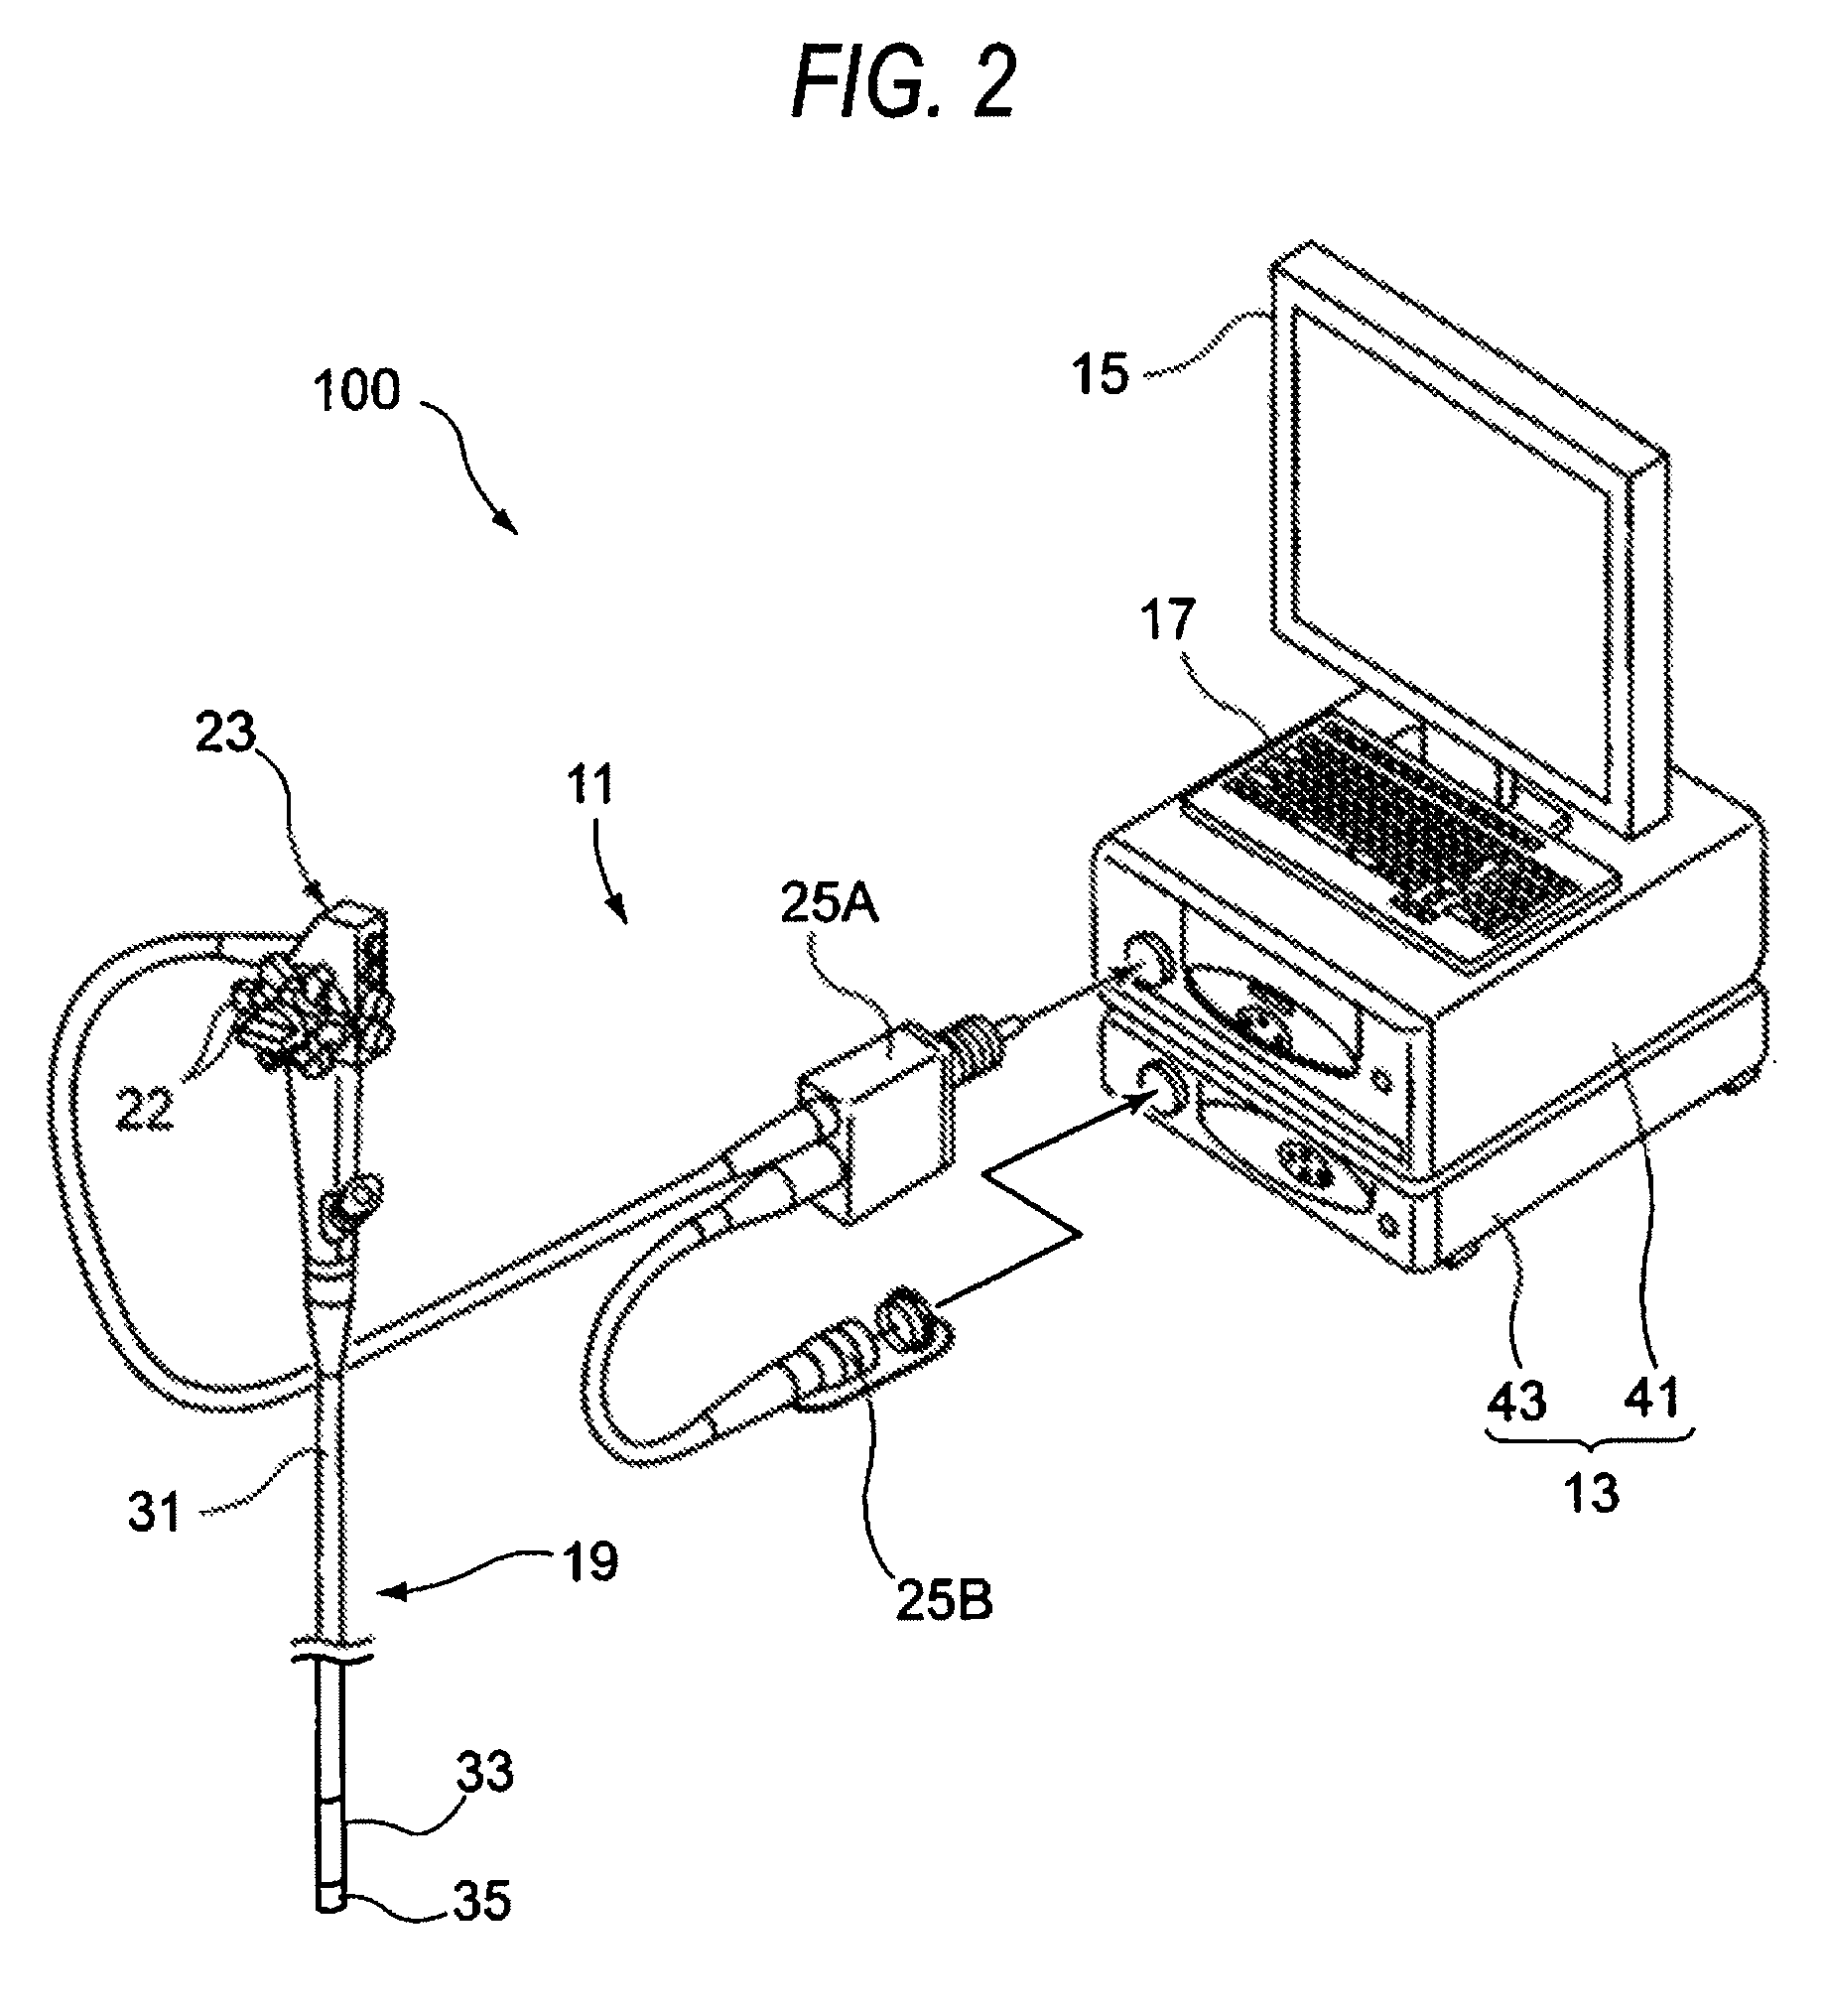 Endoscope system with color correction information